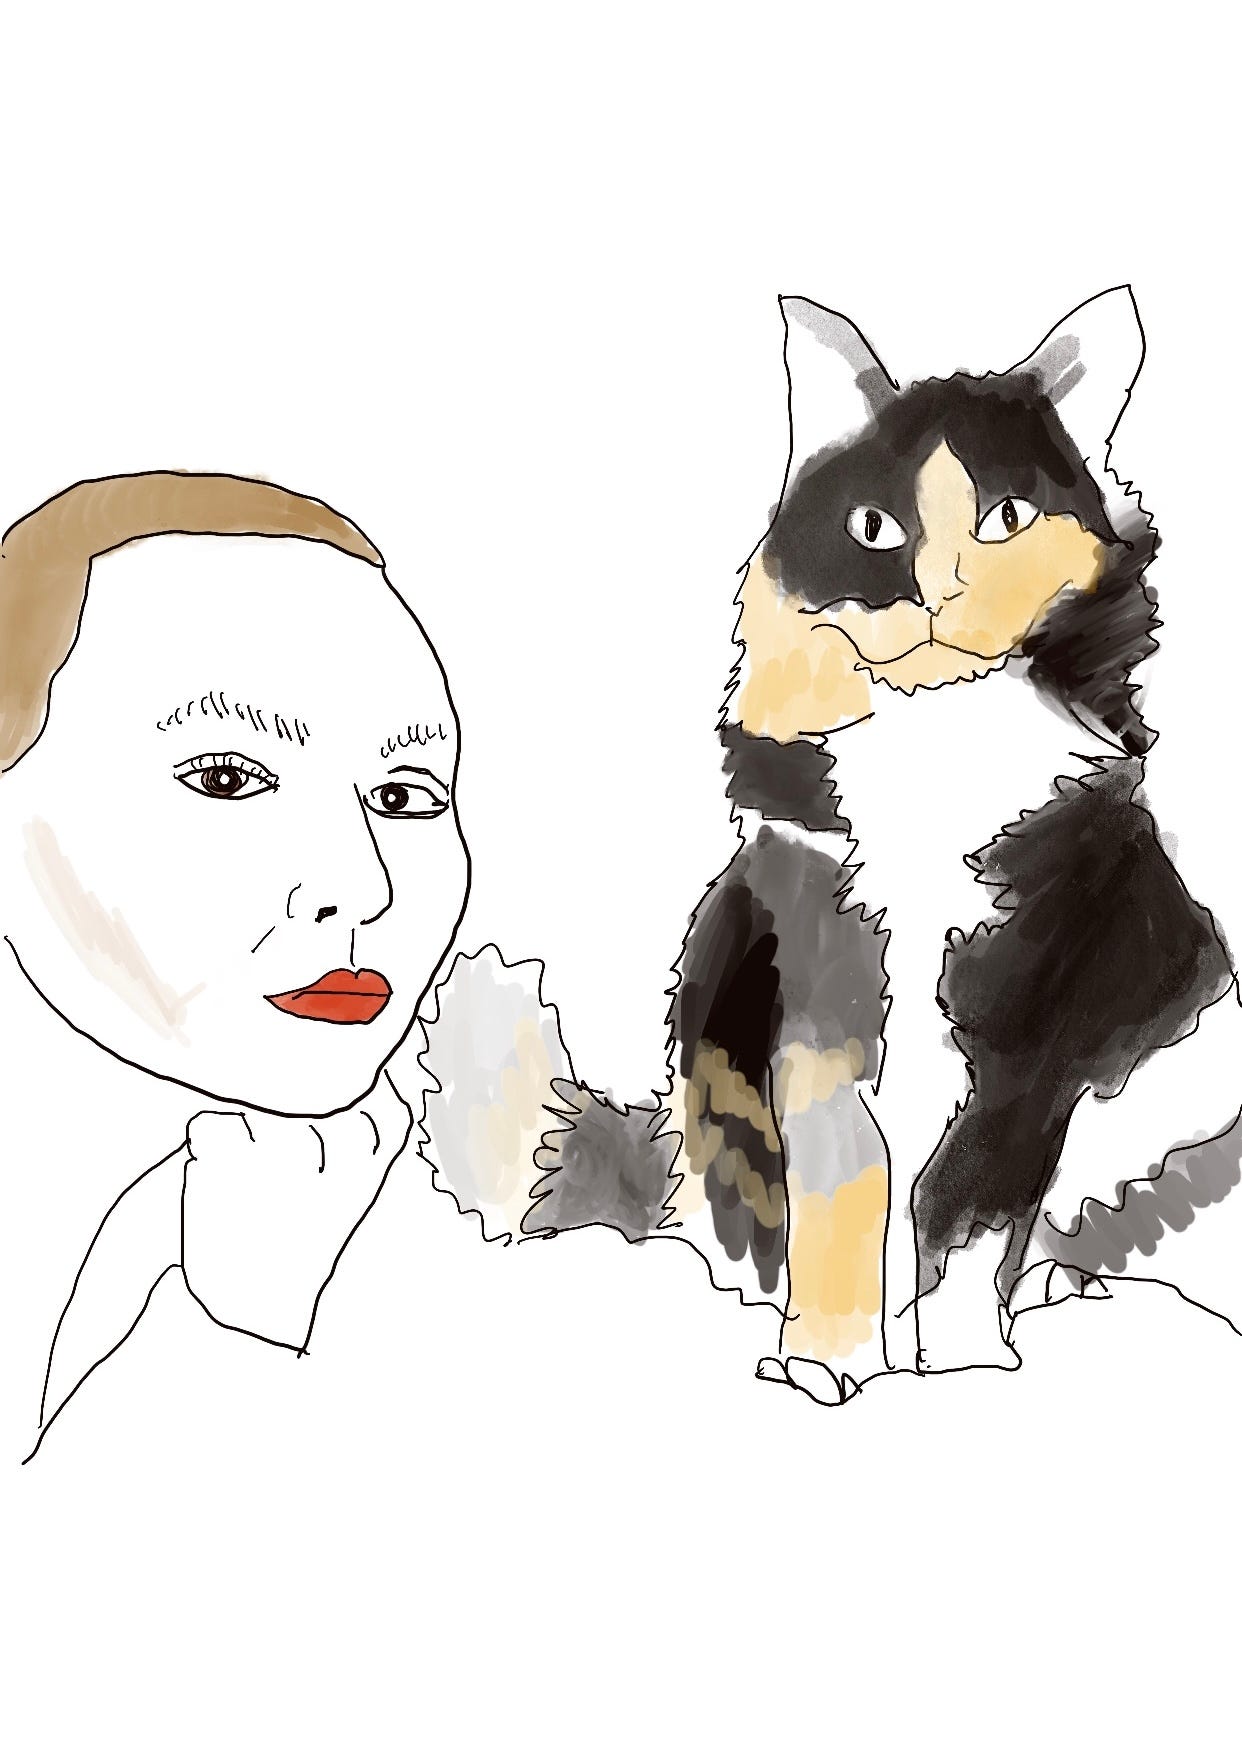 Drawing of a bald woman and calico cat